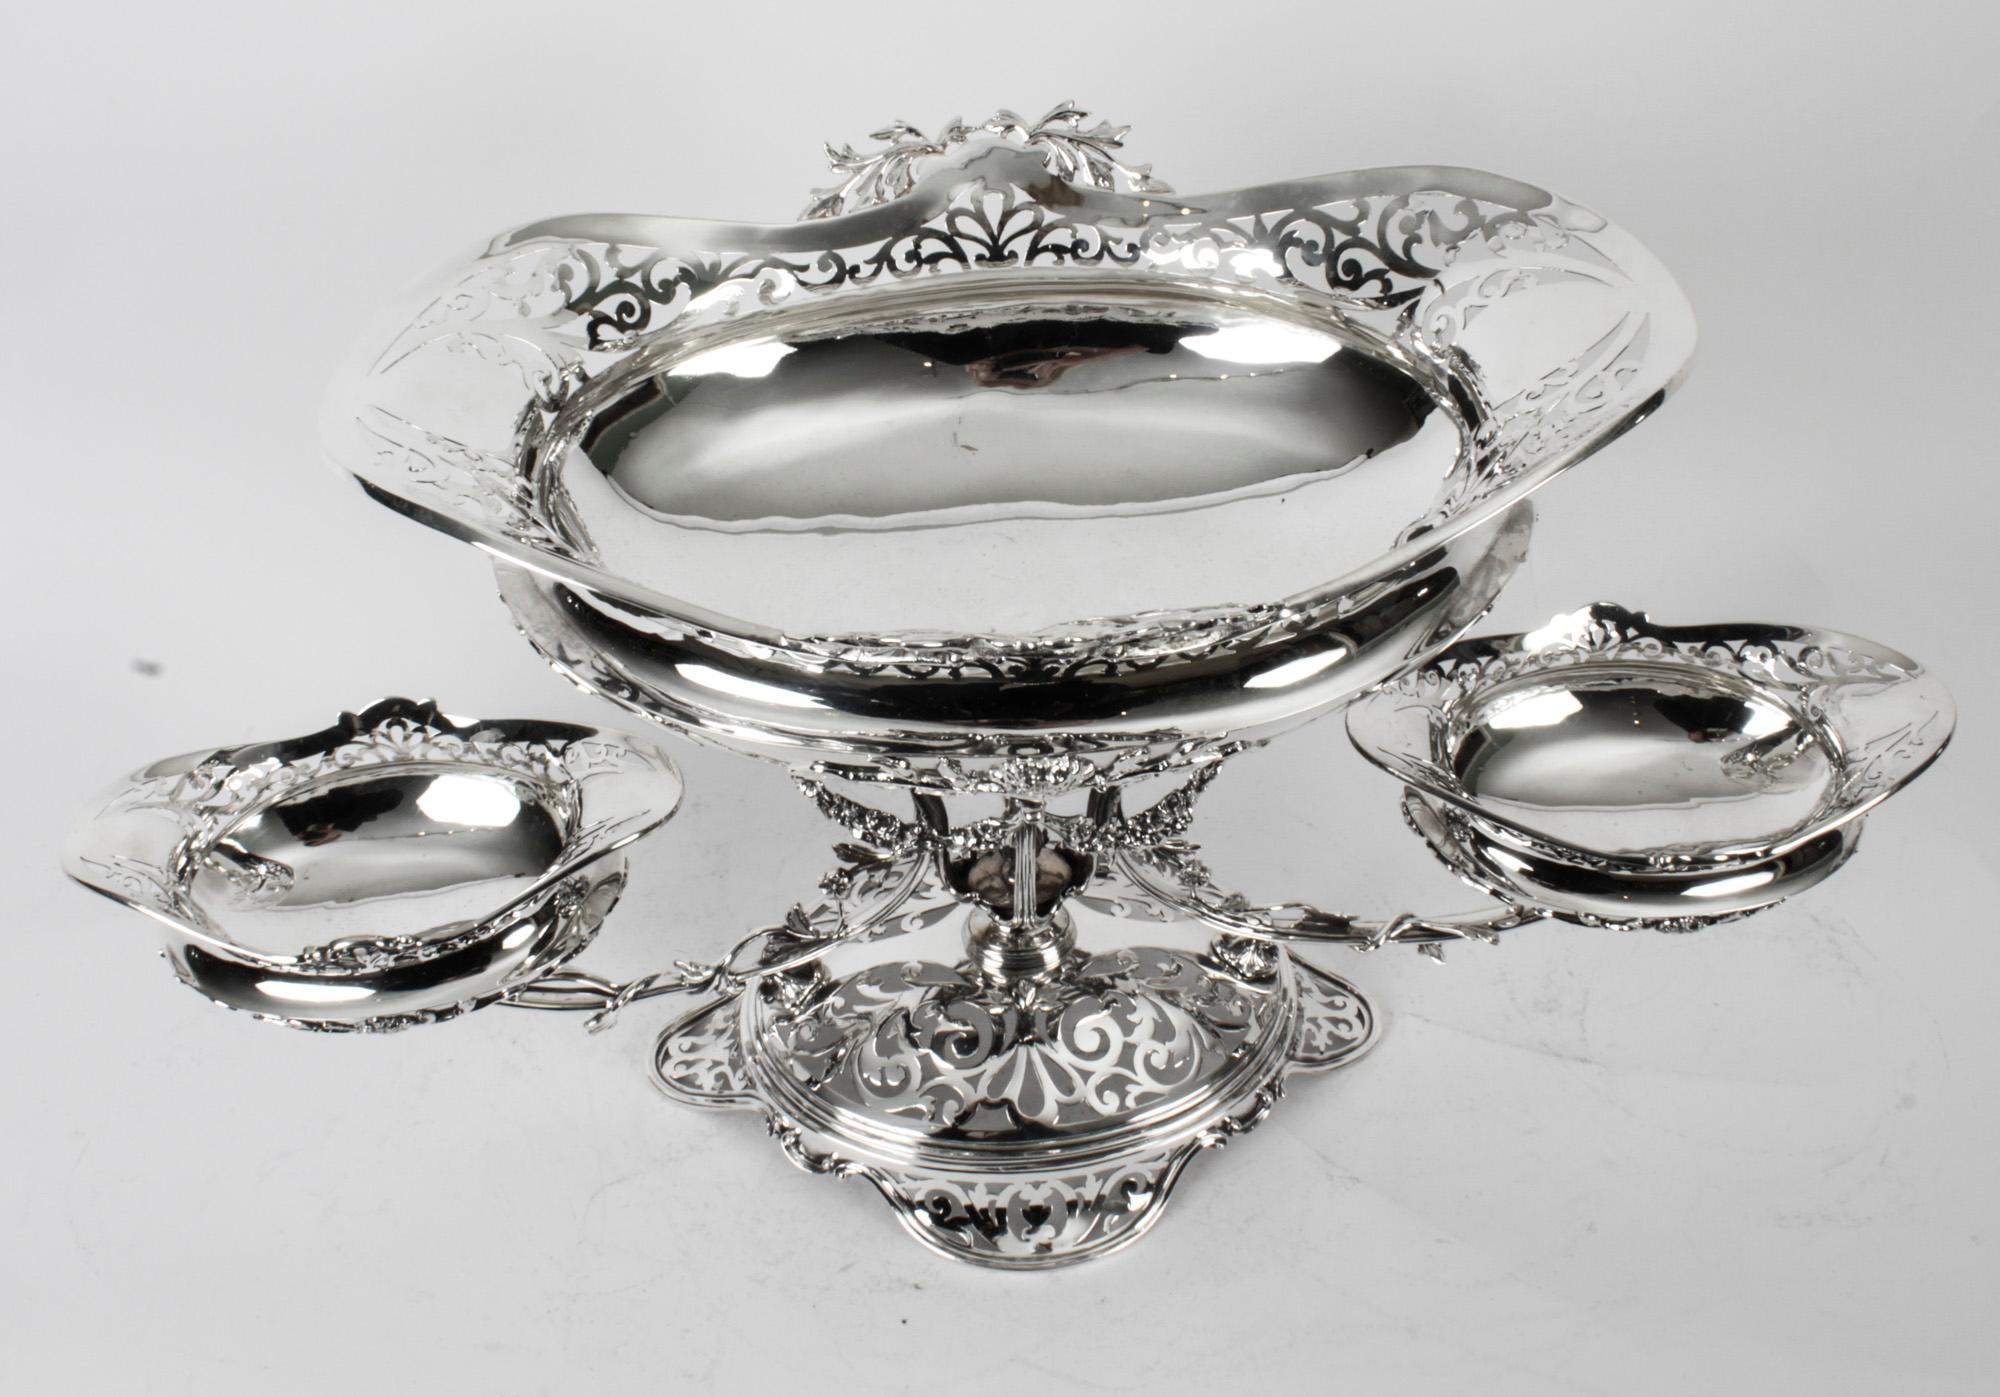 Antique Victorian Silverplate Centrepiece Mappin & Webb 1880 19th Century For Sale 5